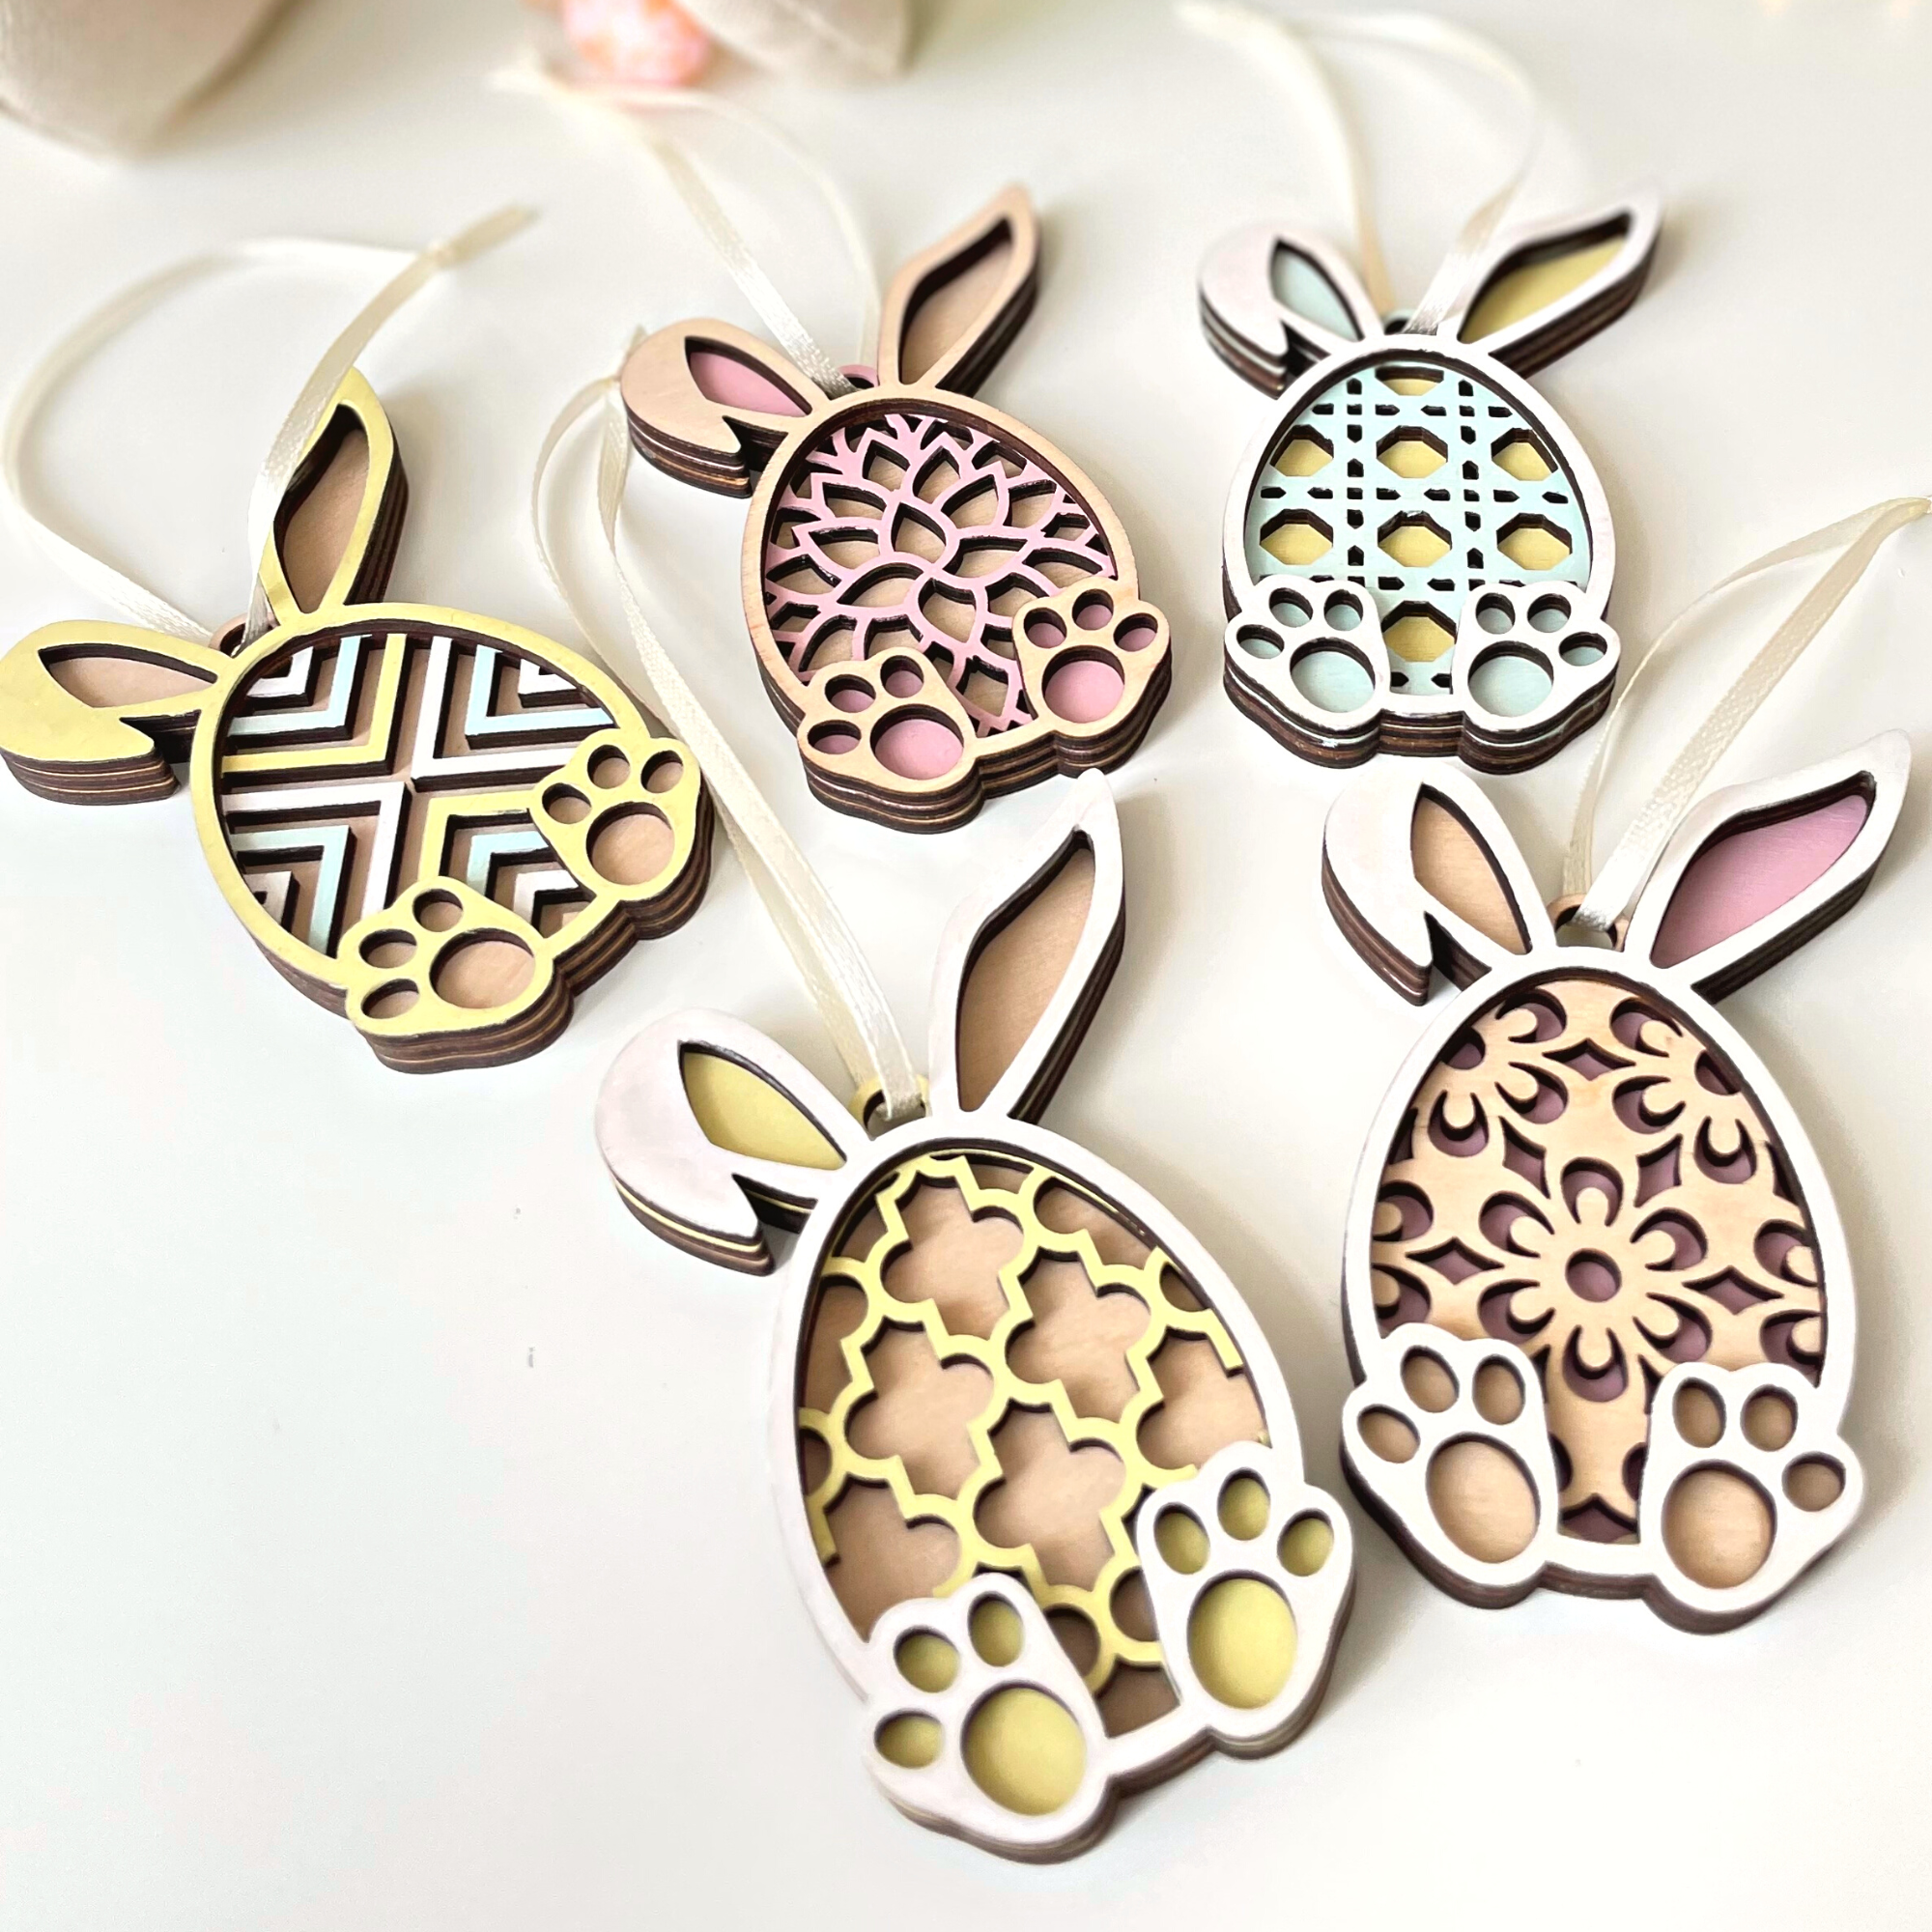 EASTER ORNAMENTS